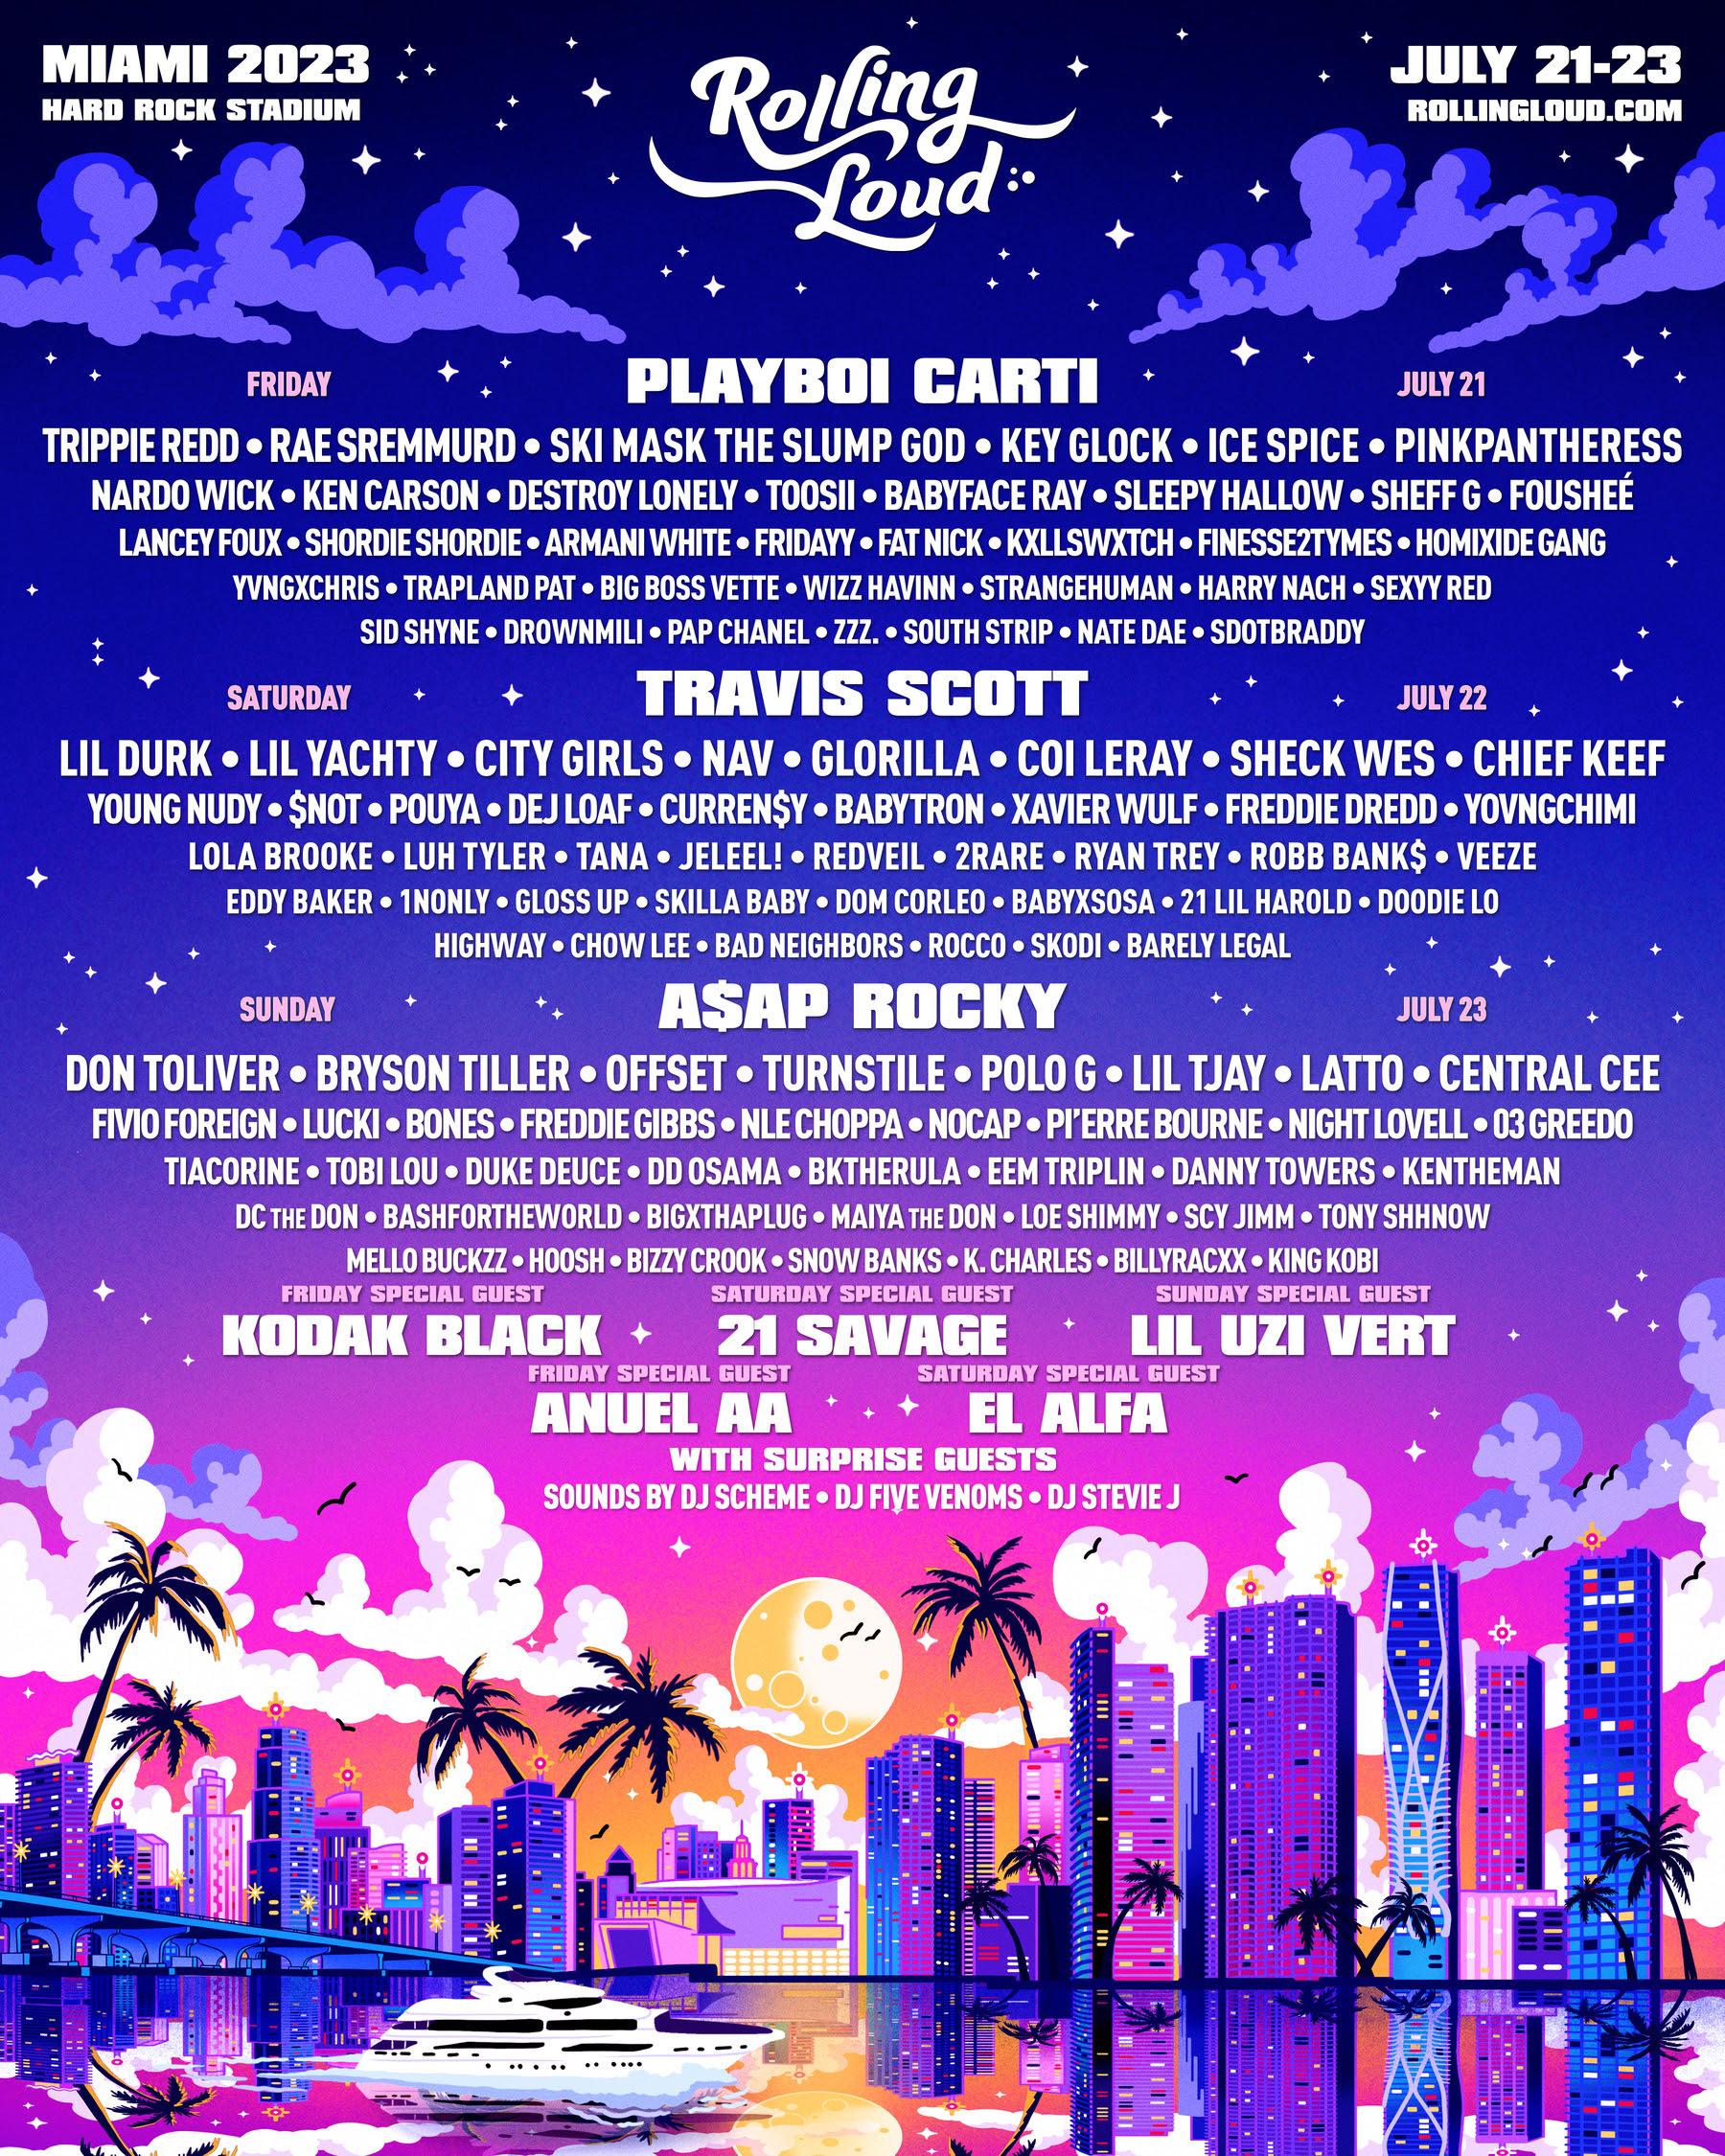 Welcome Playboi Carti to Rolling Loud NY 2022